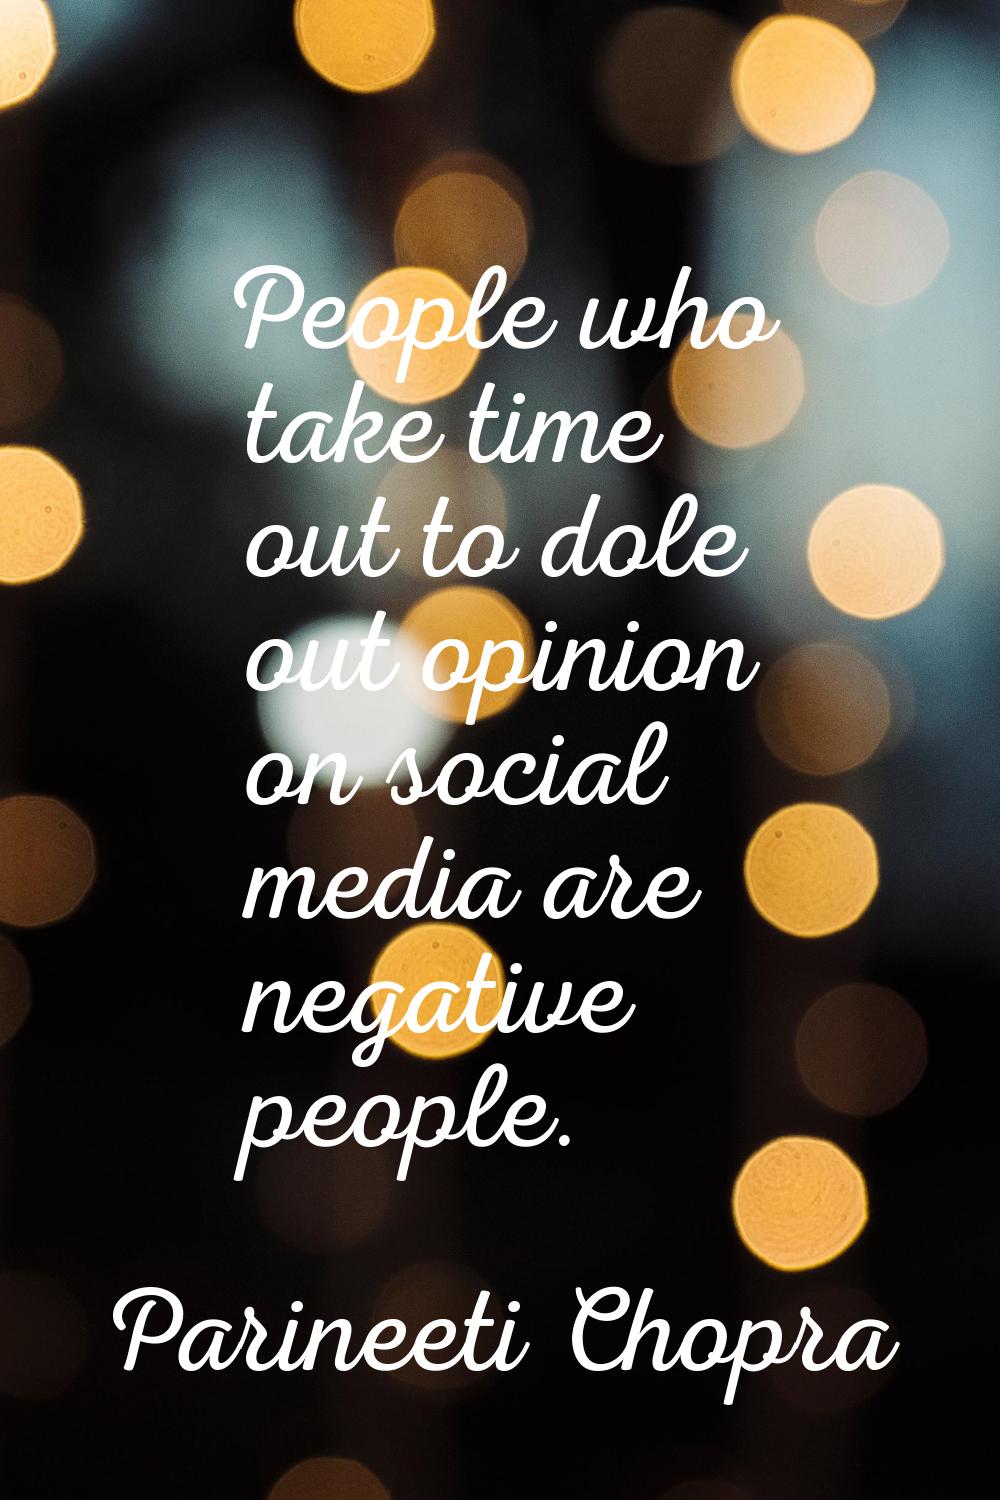 People who take time out to dole out opinion on social media are negative people.